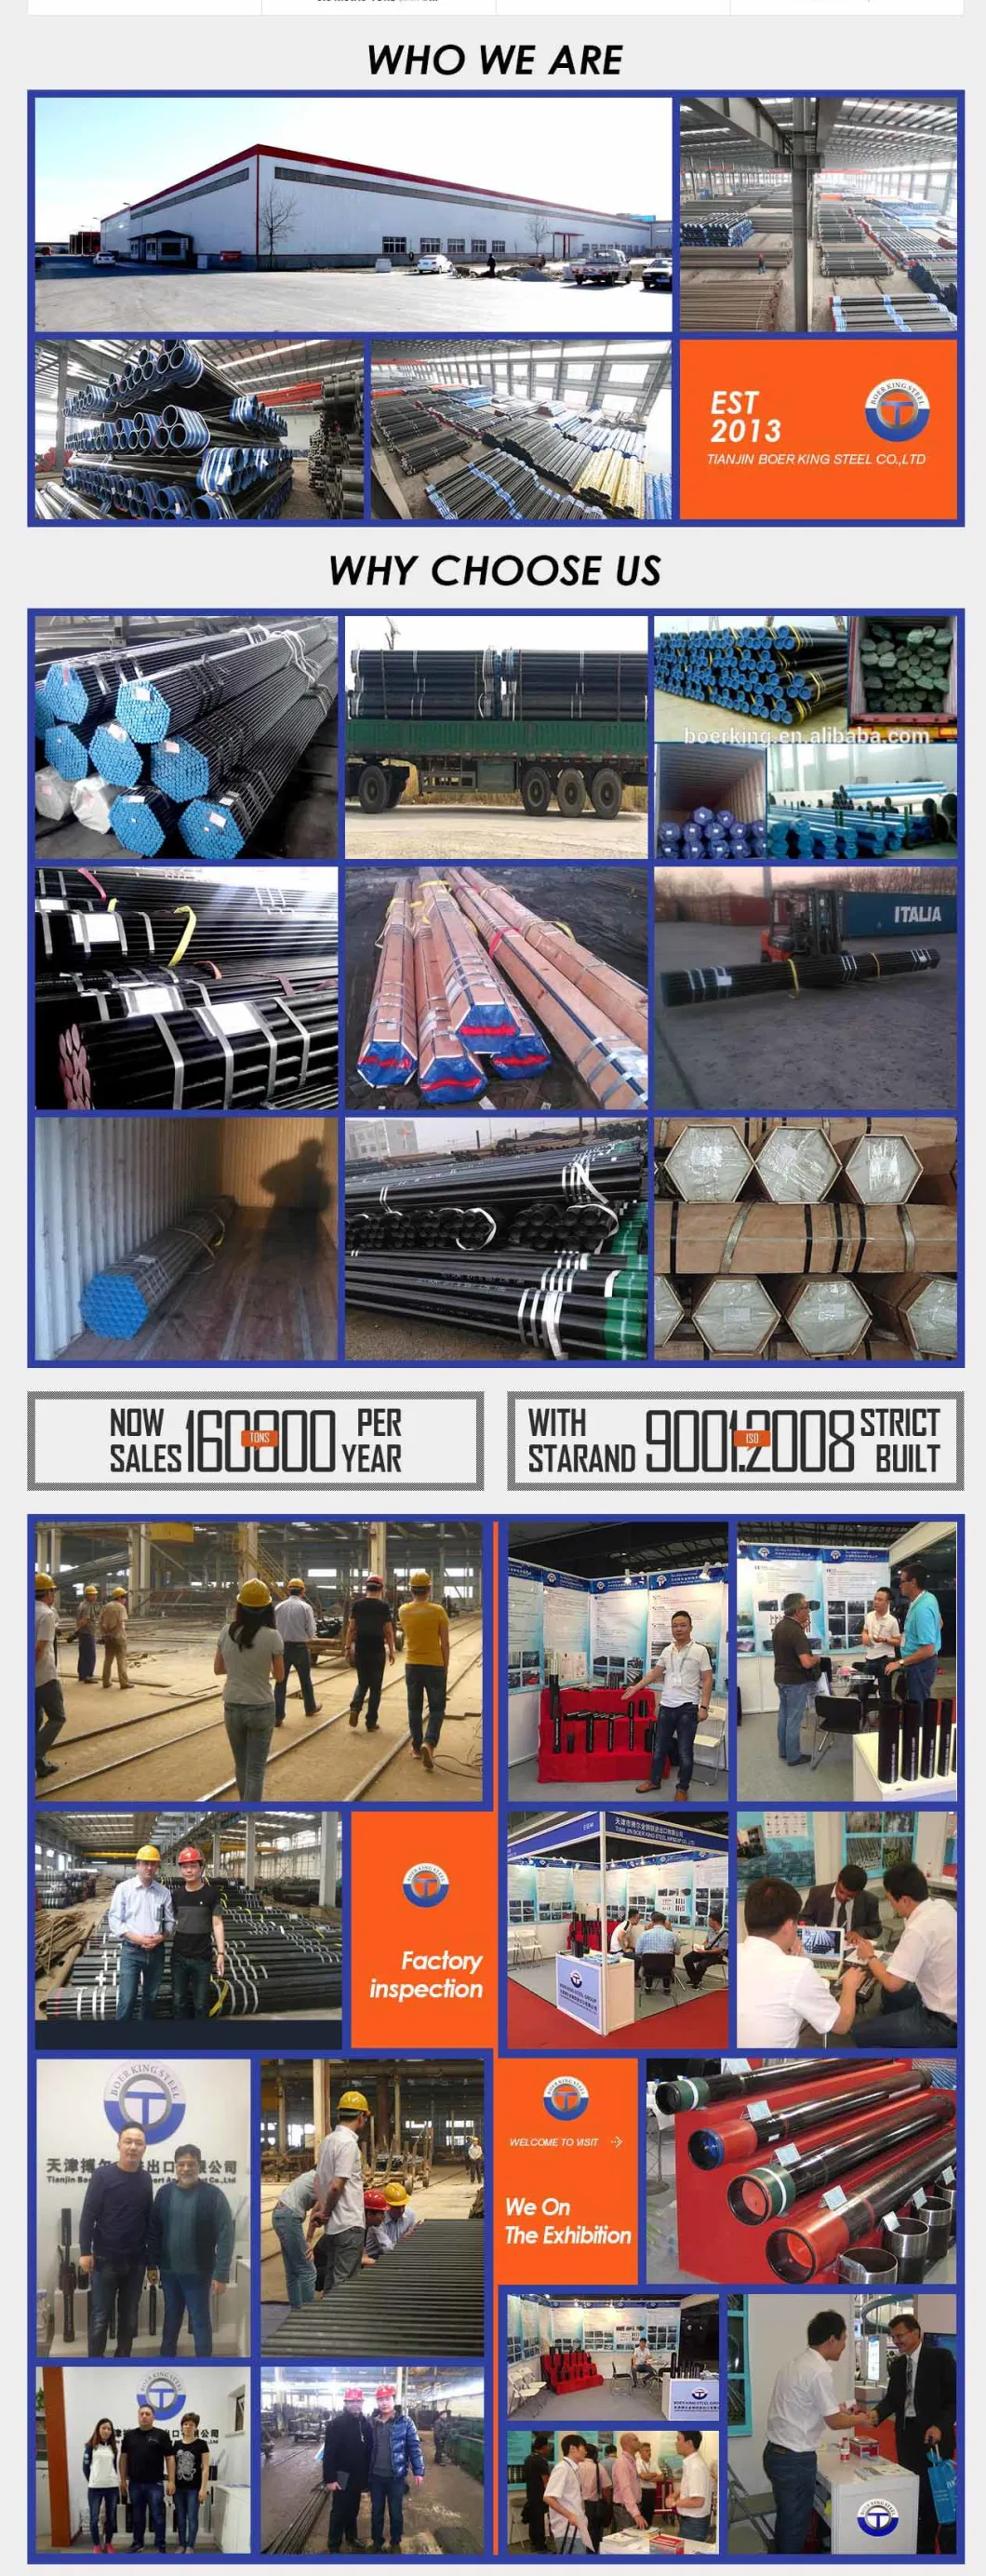 En10225 AISI 4130 1020 Q195 Q235 16mn Carbon Welded Steel Pipe ERW SSAW Ms Tube for Construction